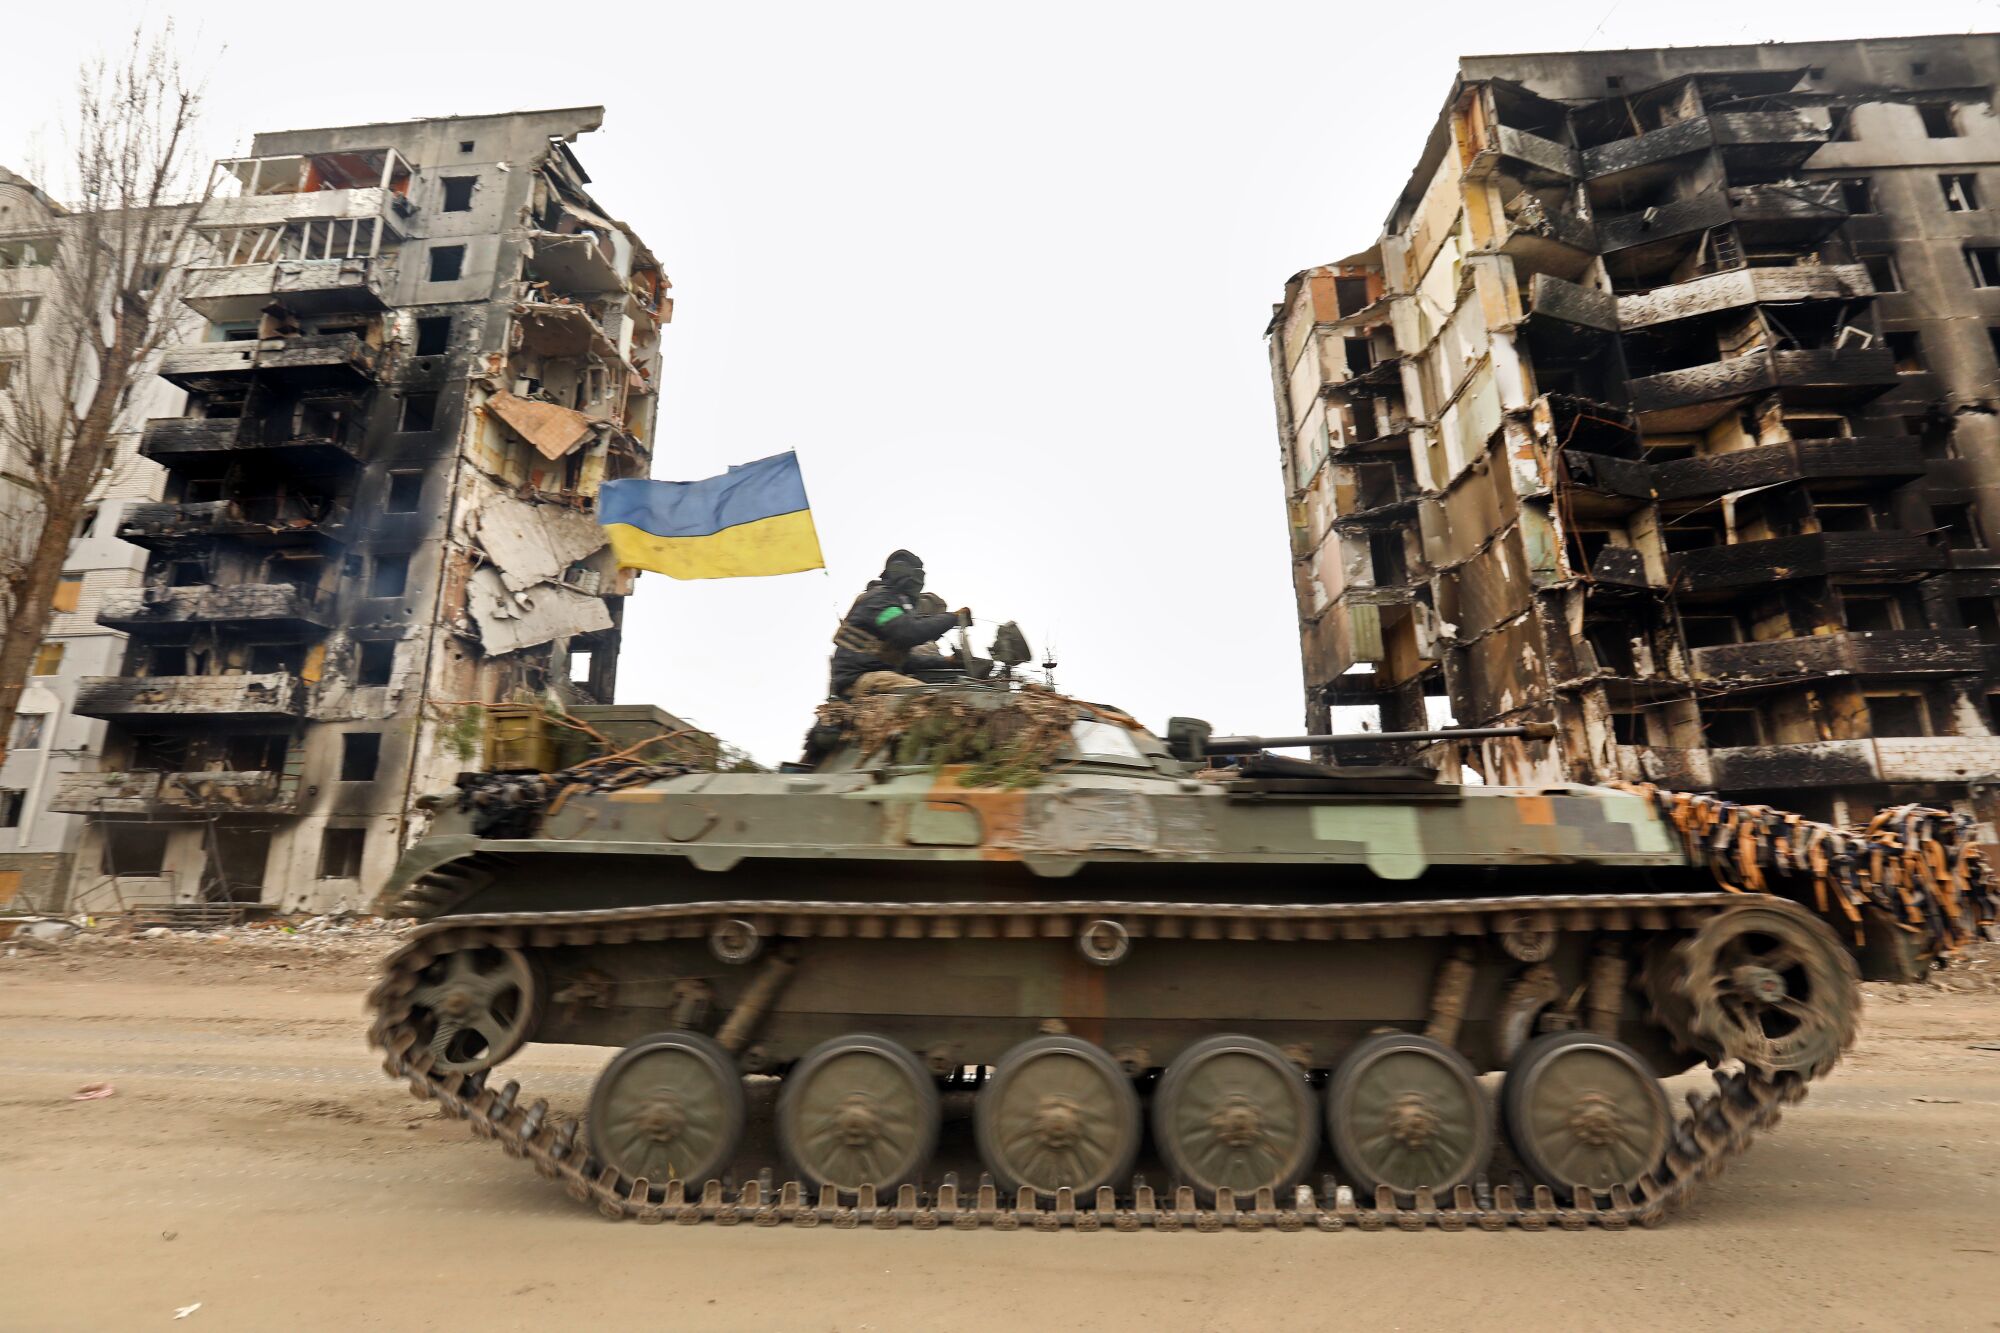 A tank with the blue-and-yellow Ukrainian flag rolls past burned-out buildings.